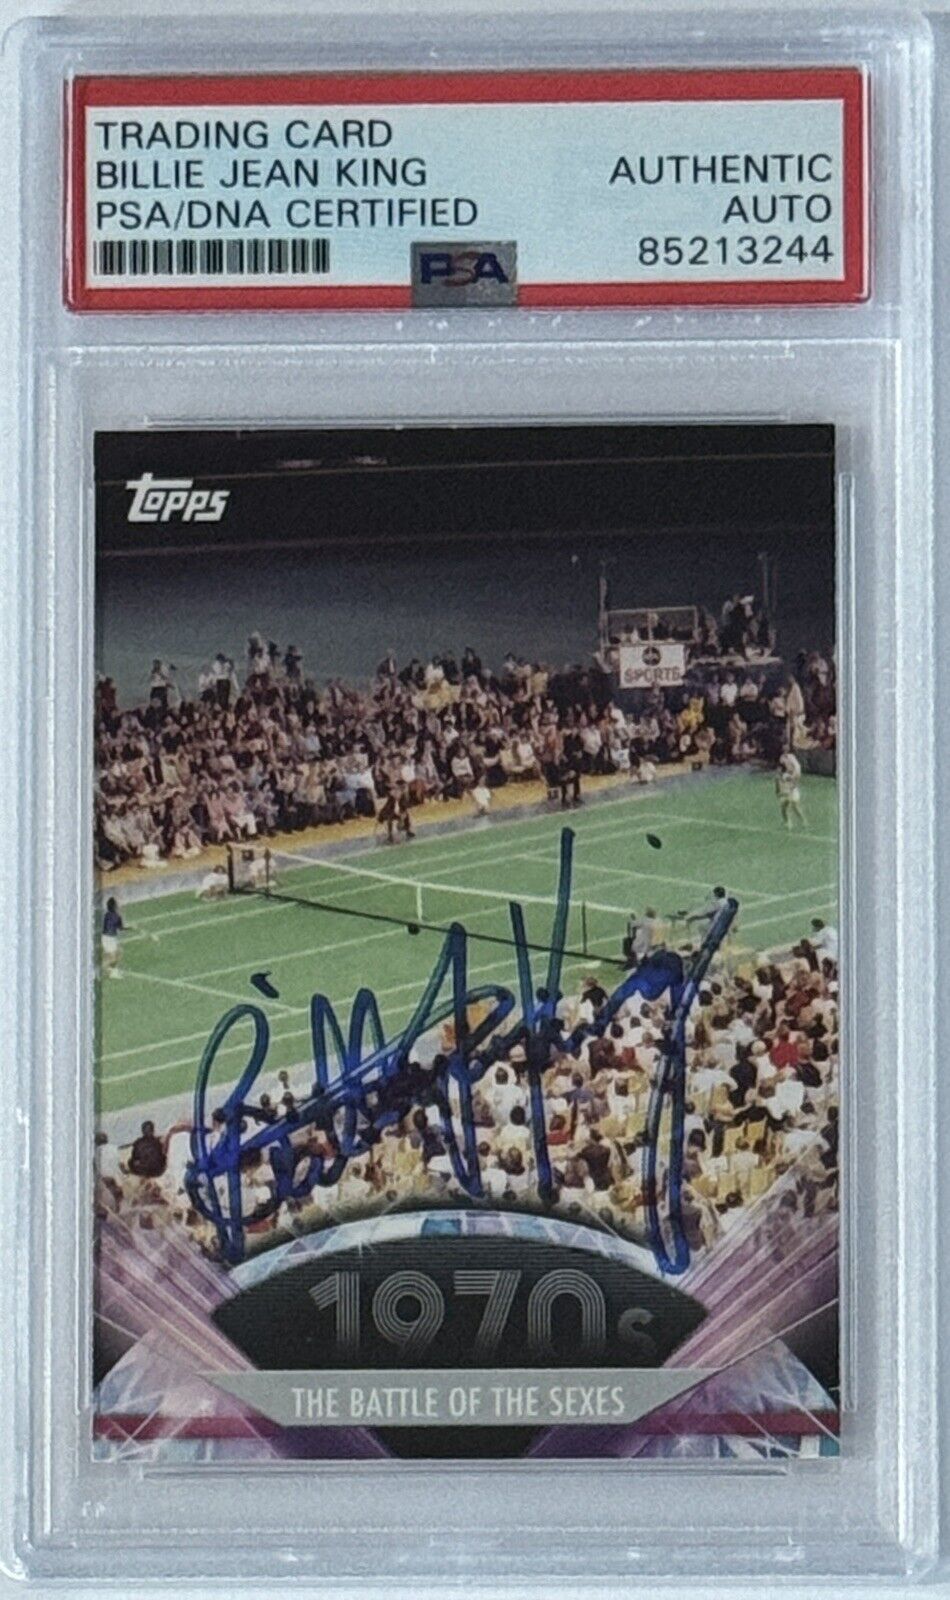 2011 TOPPS AMERICAN PIE BILLIE JEAN KING BATTLE SEXES PSA DNA AUTOGRAPHED SIGNED